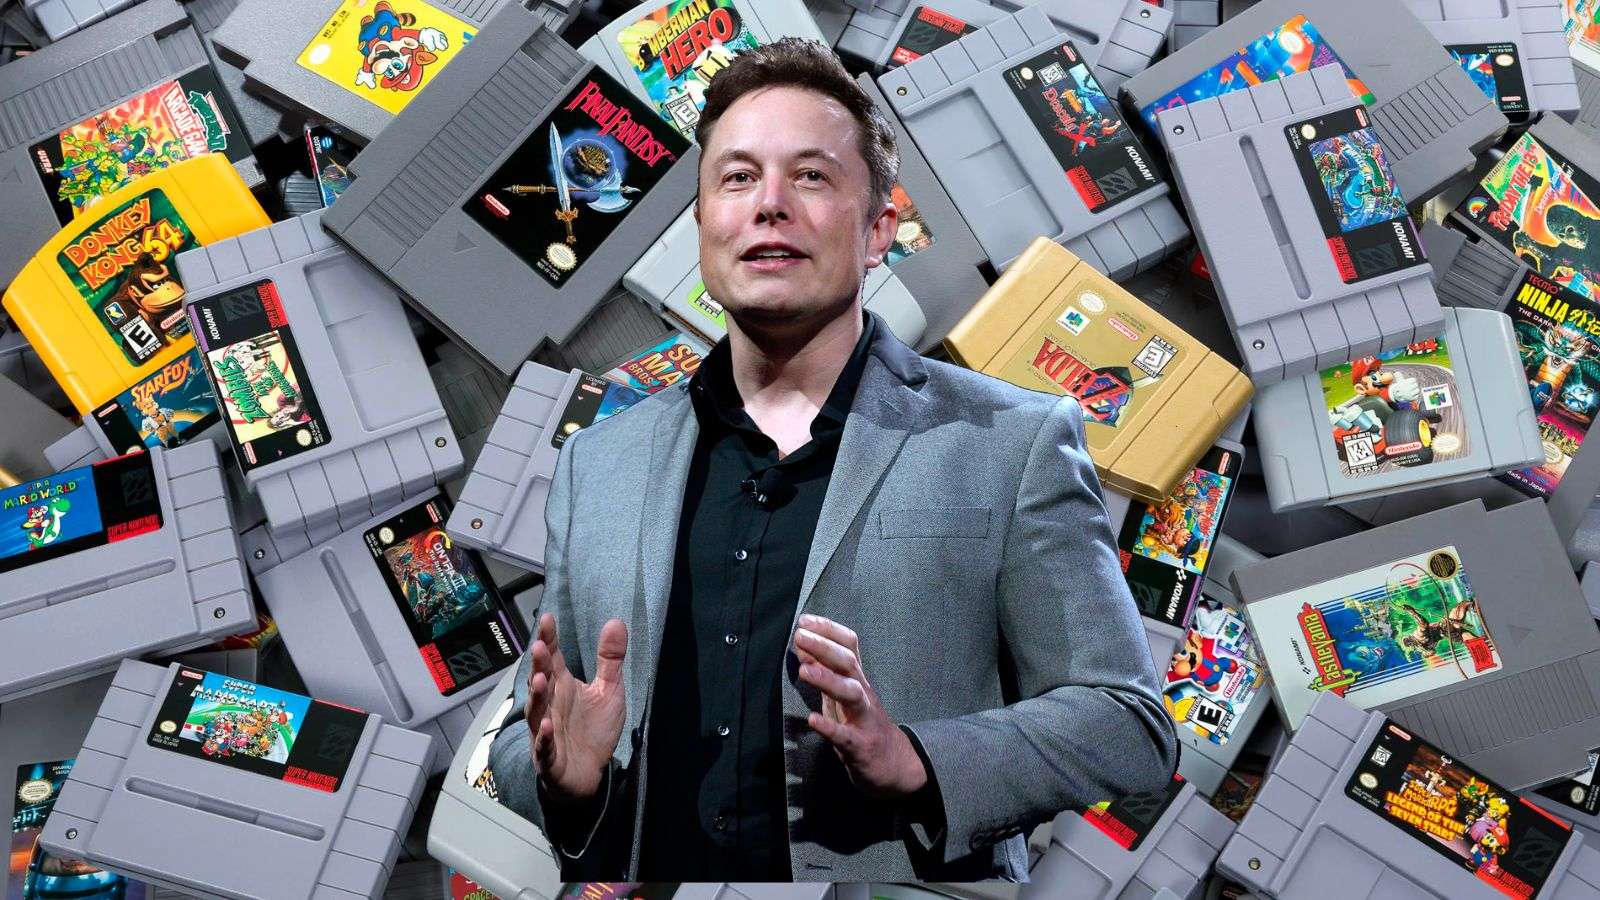 Elon Musk in front of video games